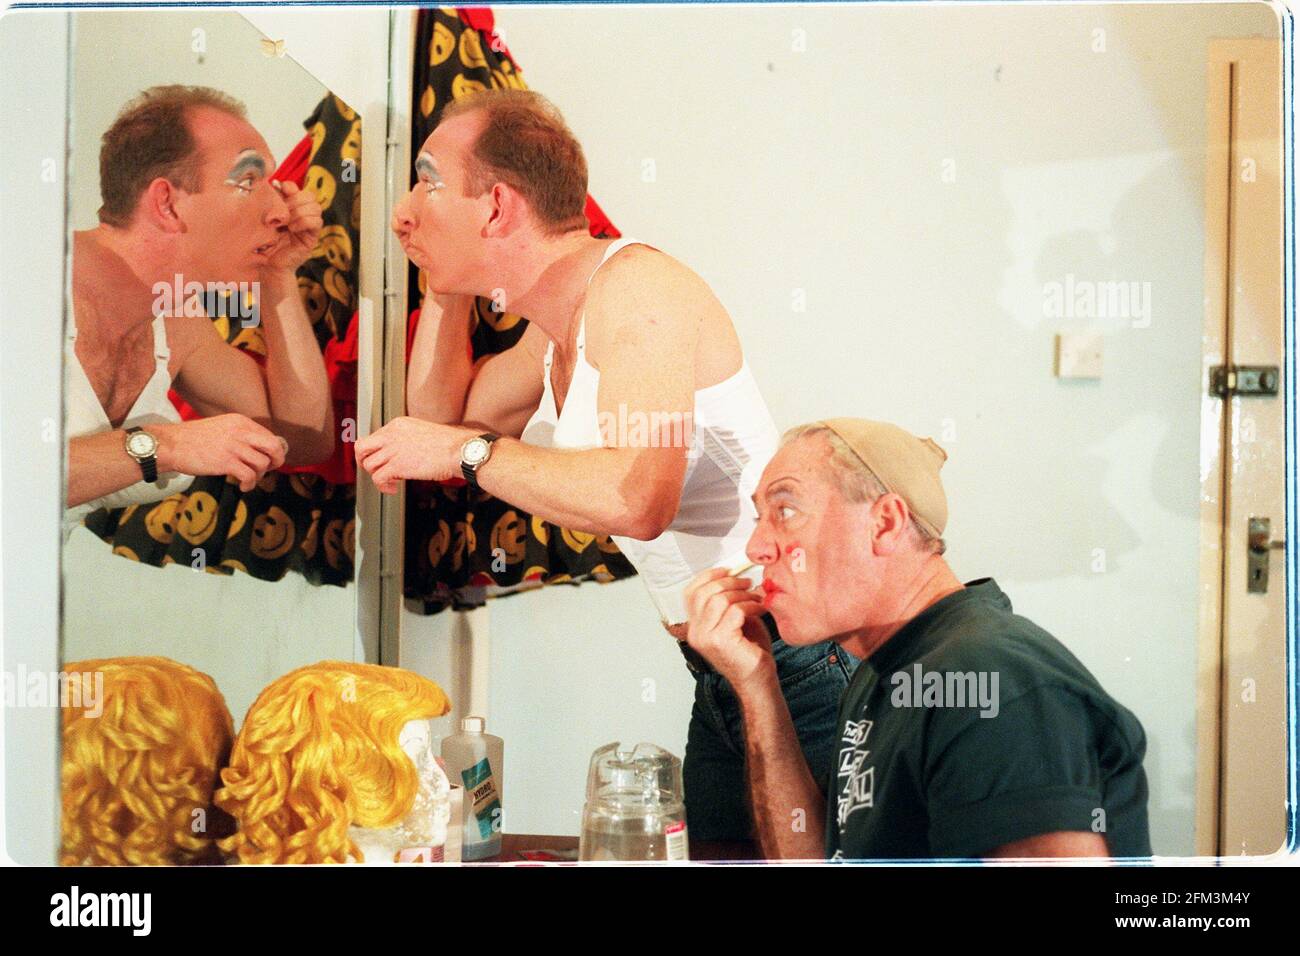 Actors James Horne  and Andrew Ryan who play ugly sisters Sharon and Tracey  preparing for a rehearsal of the pantomime Cinderella before their season opens at the Theatre Royal Bath on 19 December Stock Photo